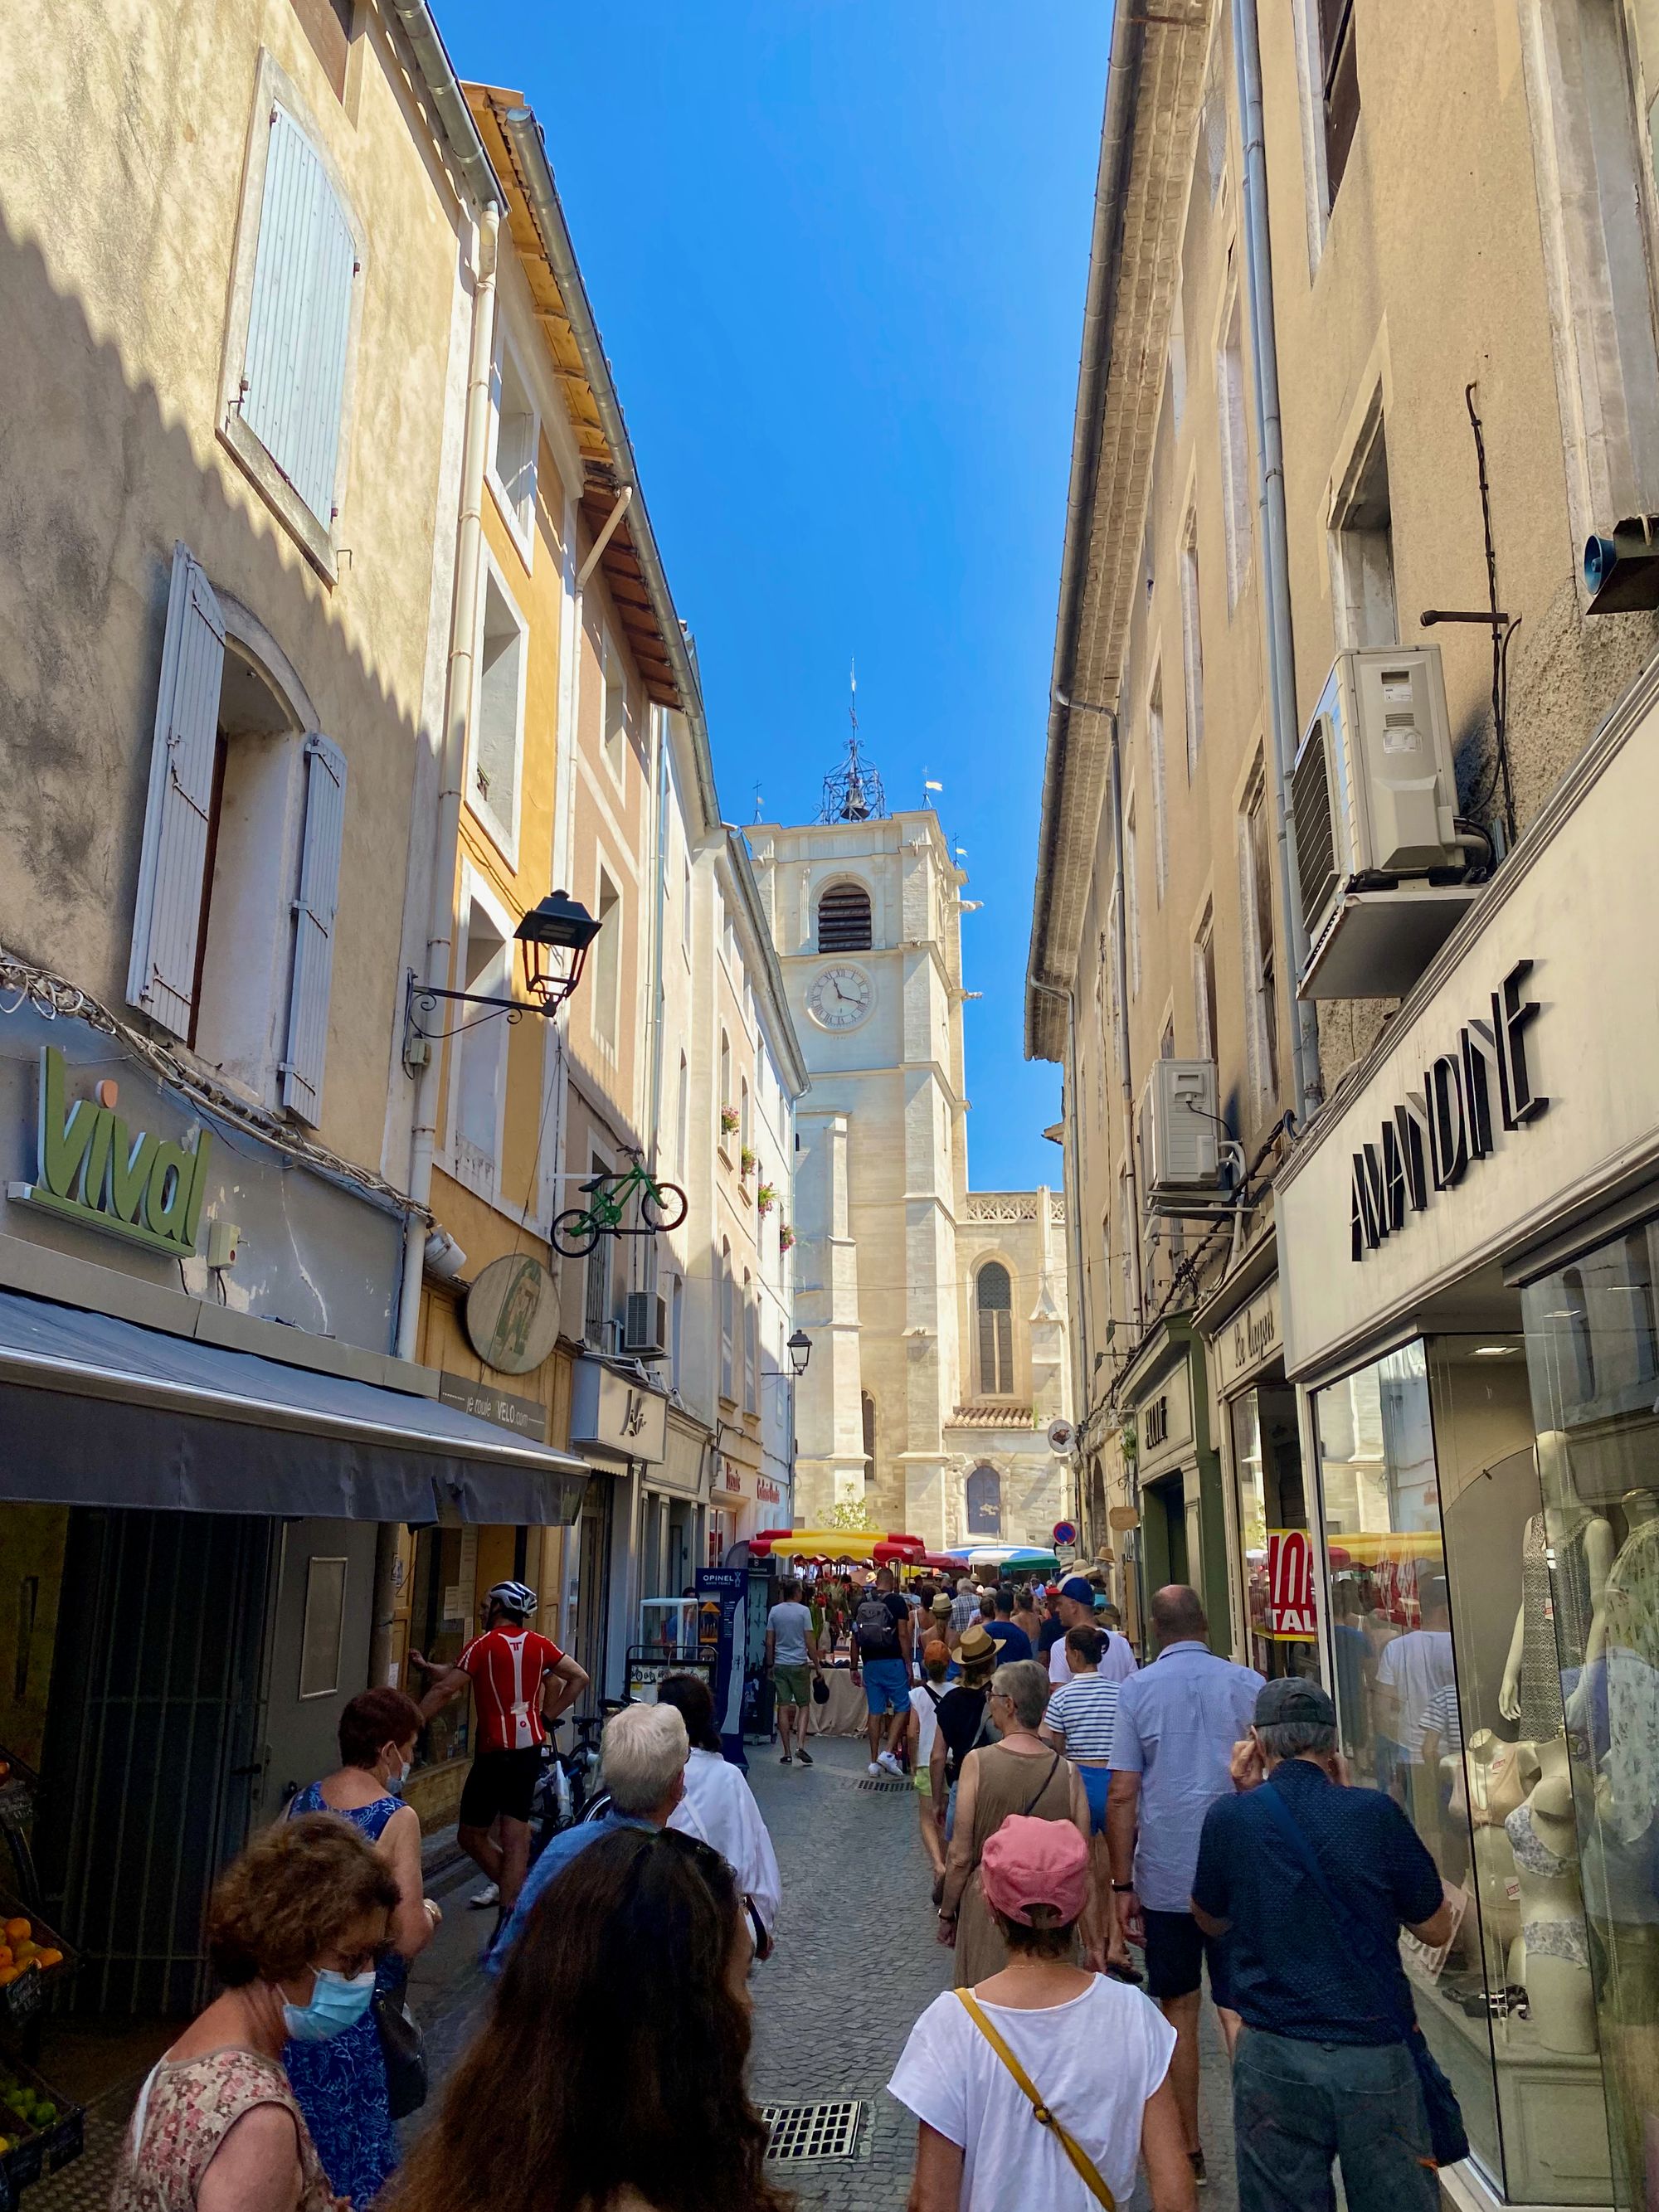 Second Road Trip Part 02: South of France in 8 days